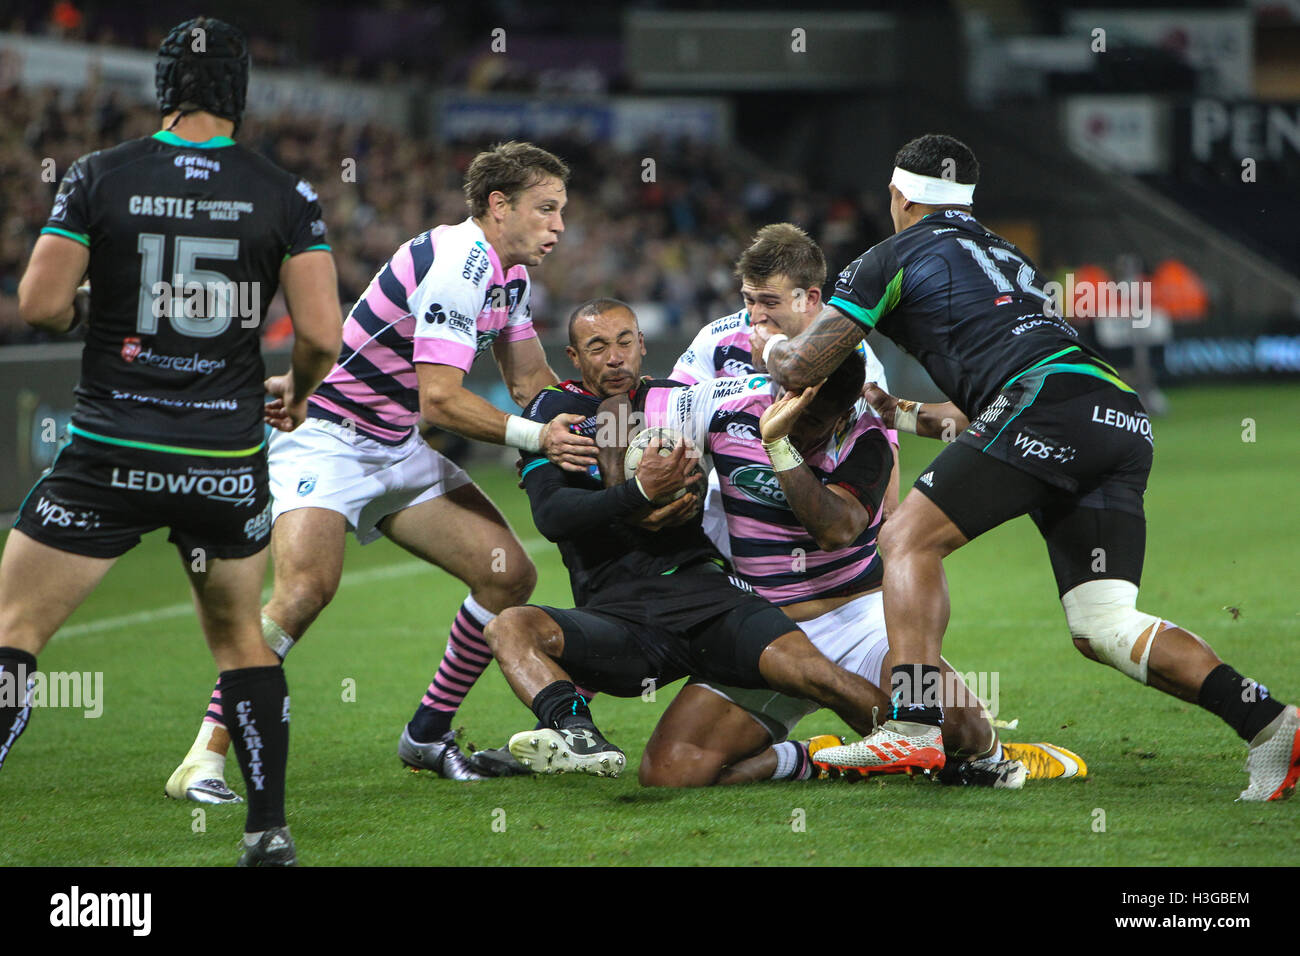 Ospreys v Cardiff Blues, Guinness Pro 12 Rugby Match, 7th October 2017, The Liberty Stadium, Swansea Stock Photo